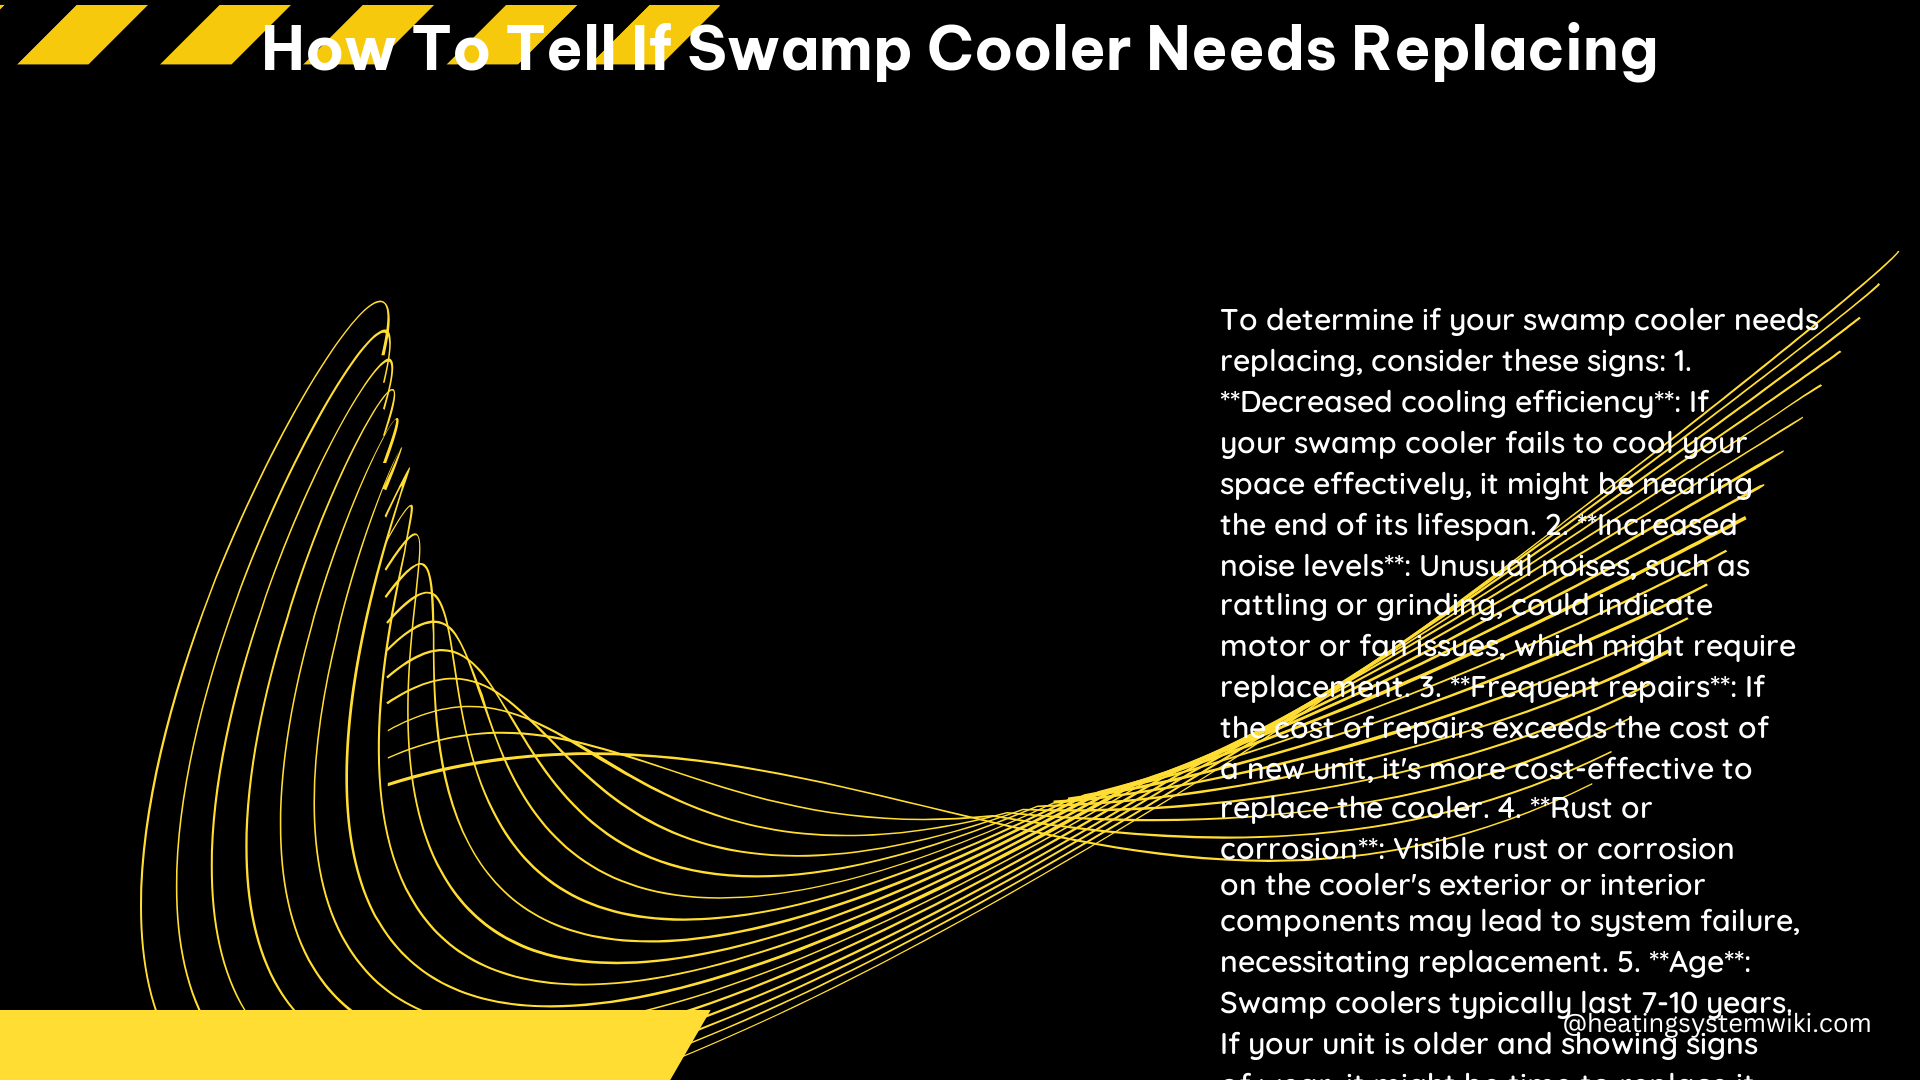 How to Tell if Swamp Cooler Needs Replacing